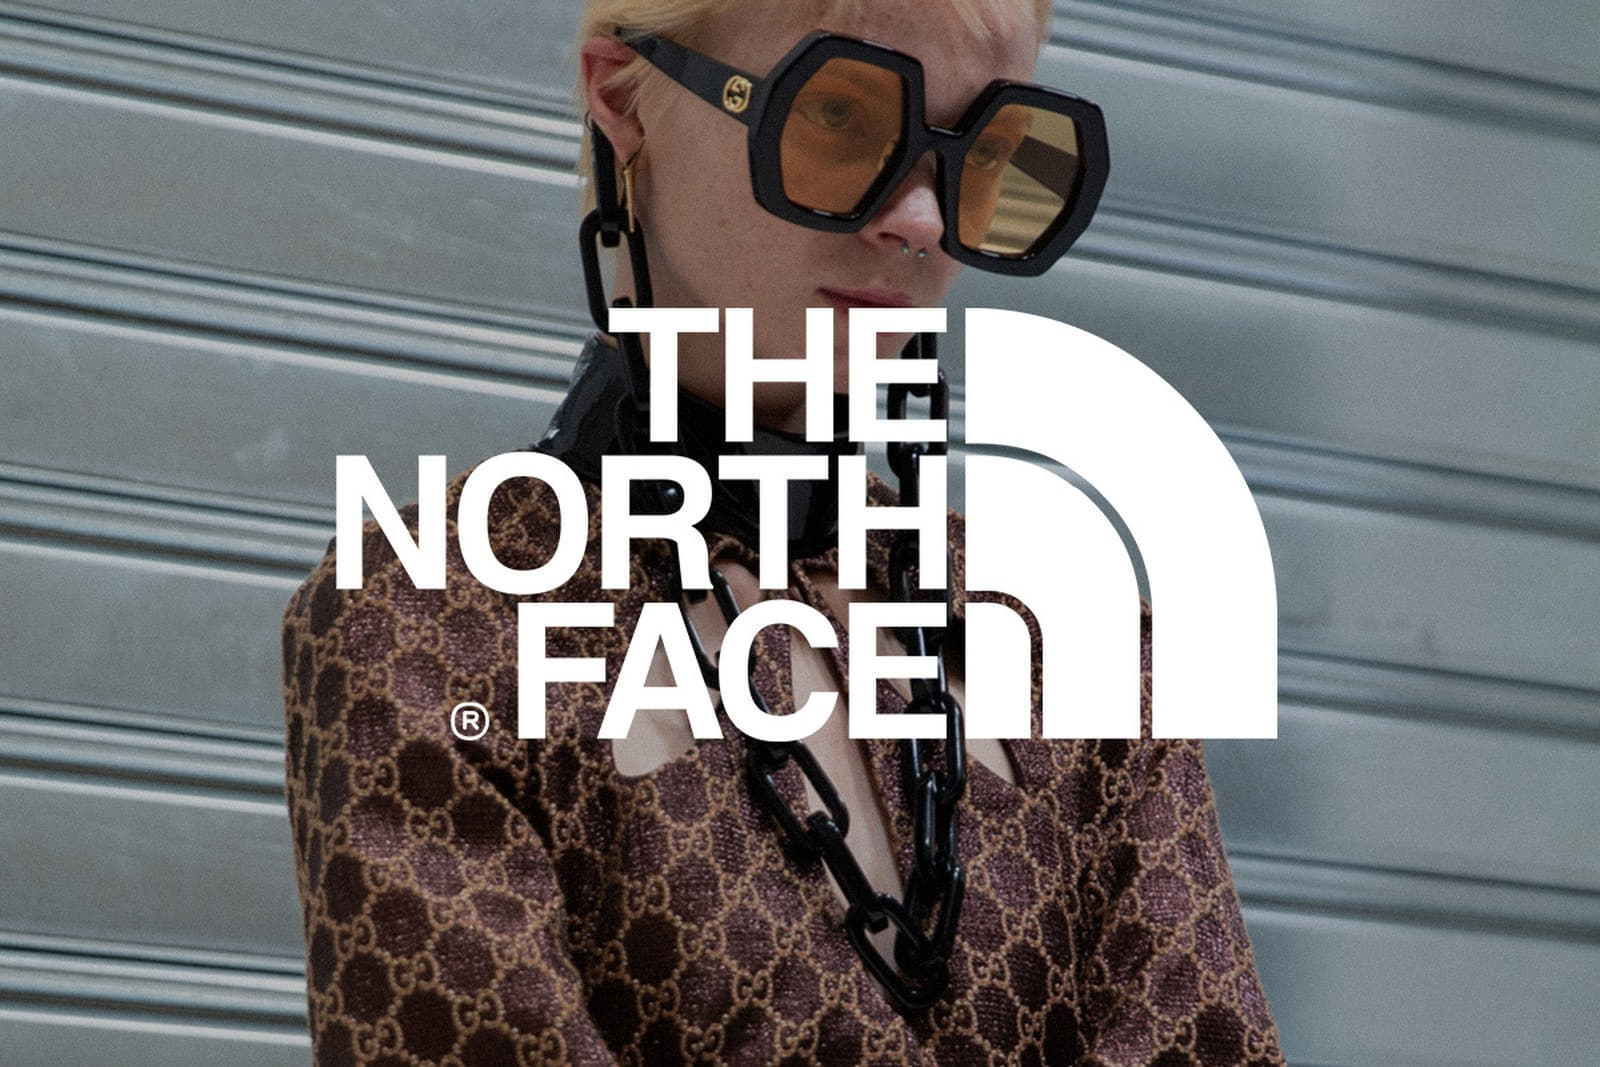 gucci-the-north-face-collaboration-teaser-02.jpg